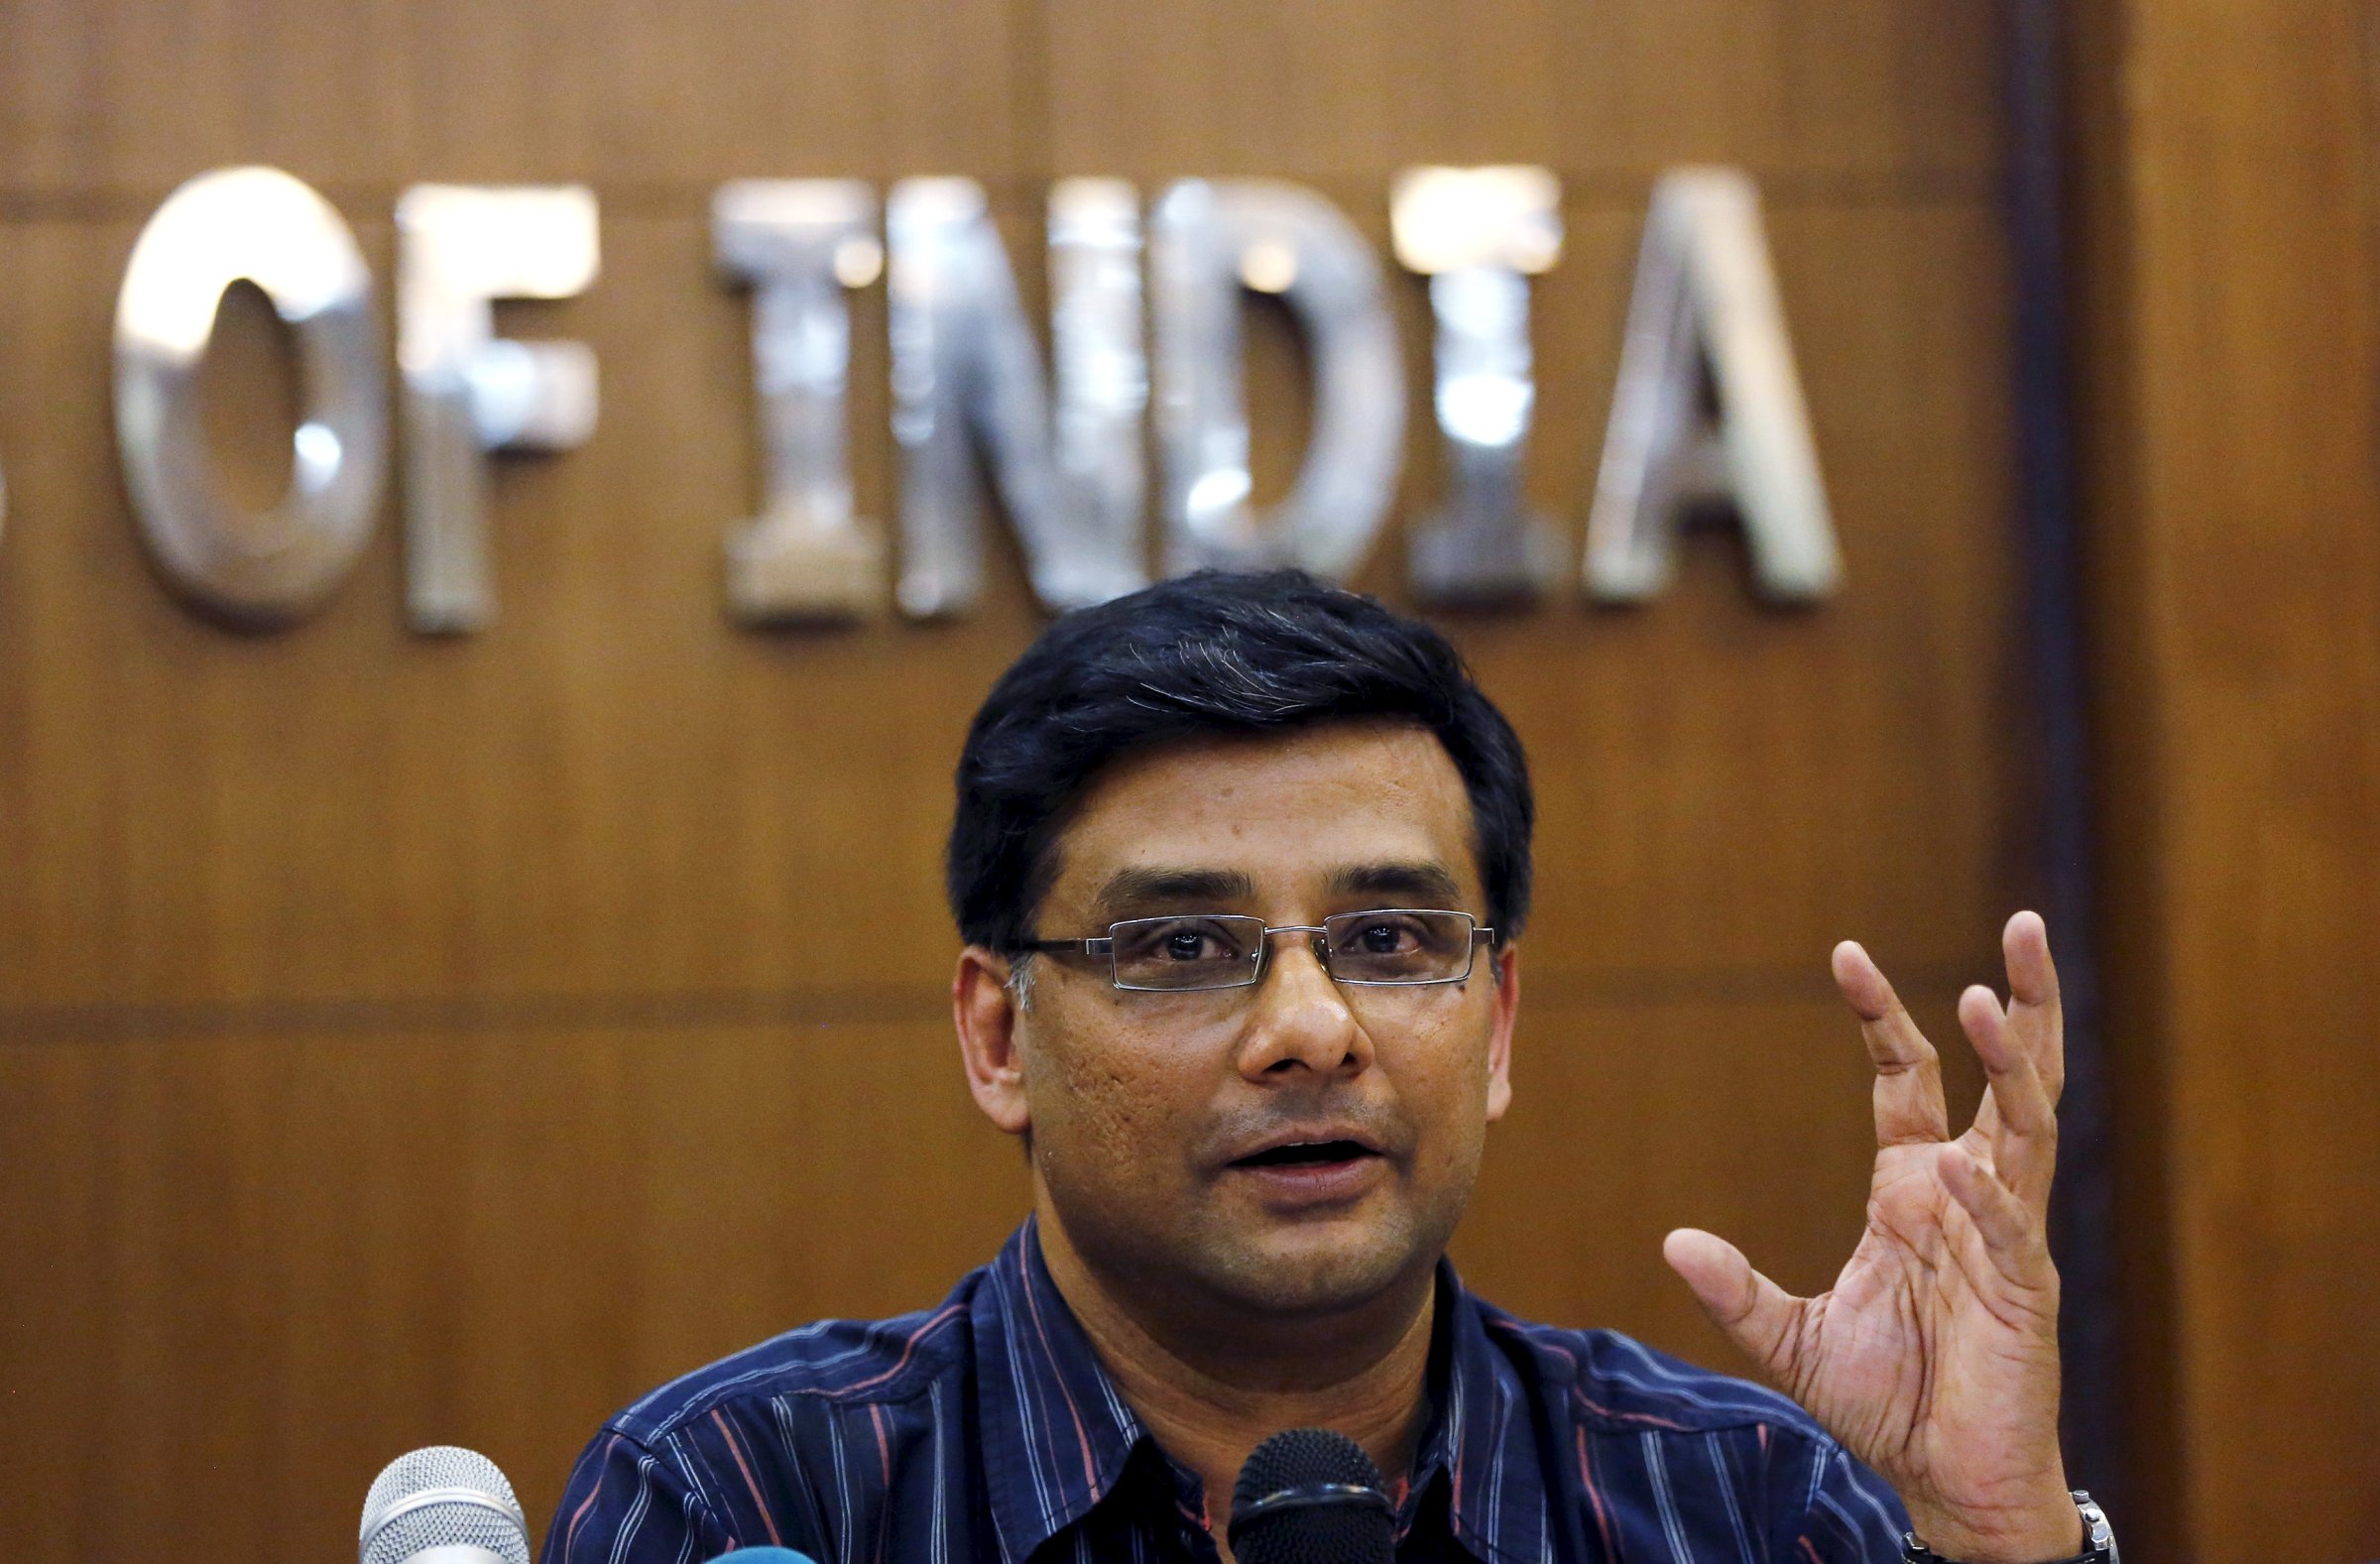 Samit Aich, executive director of Greenpeace India, gestures as he addresses the media during a news conference in New Delhi, India, May 21, 2015